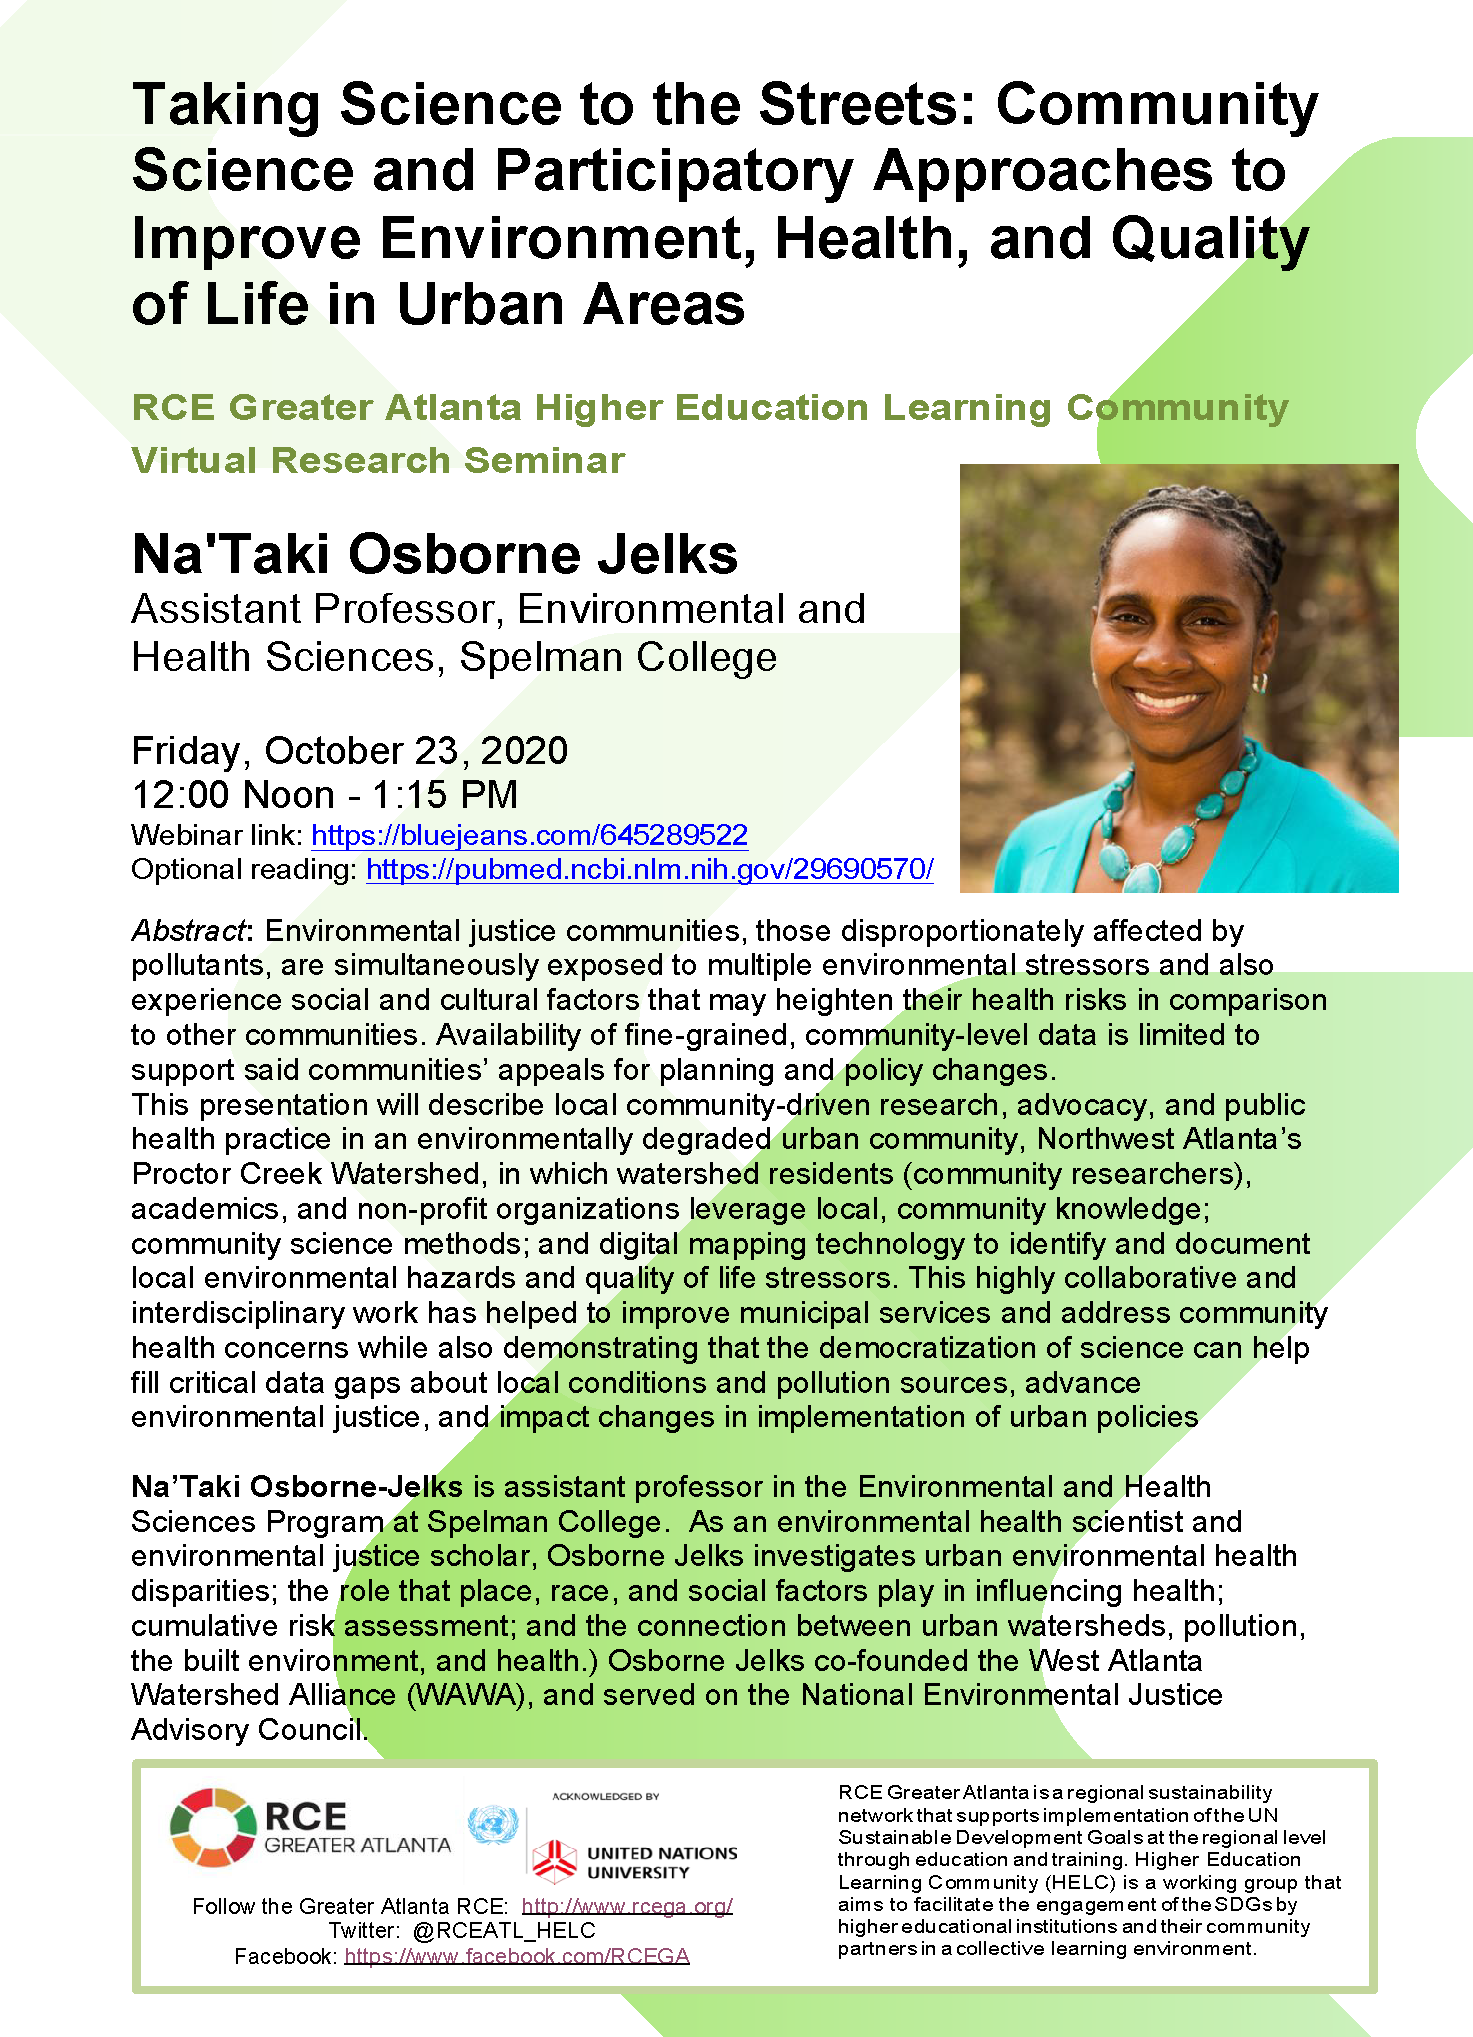 Taking Science to the Streets: Community Science and Participatory Approaches to Improve Environment, Health, and Quality of Life in Urban Areas